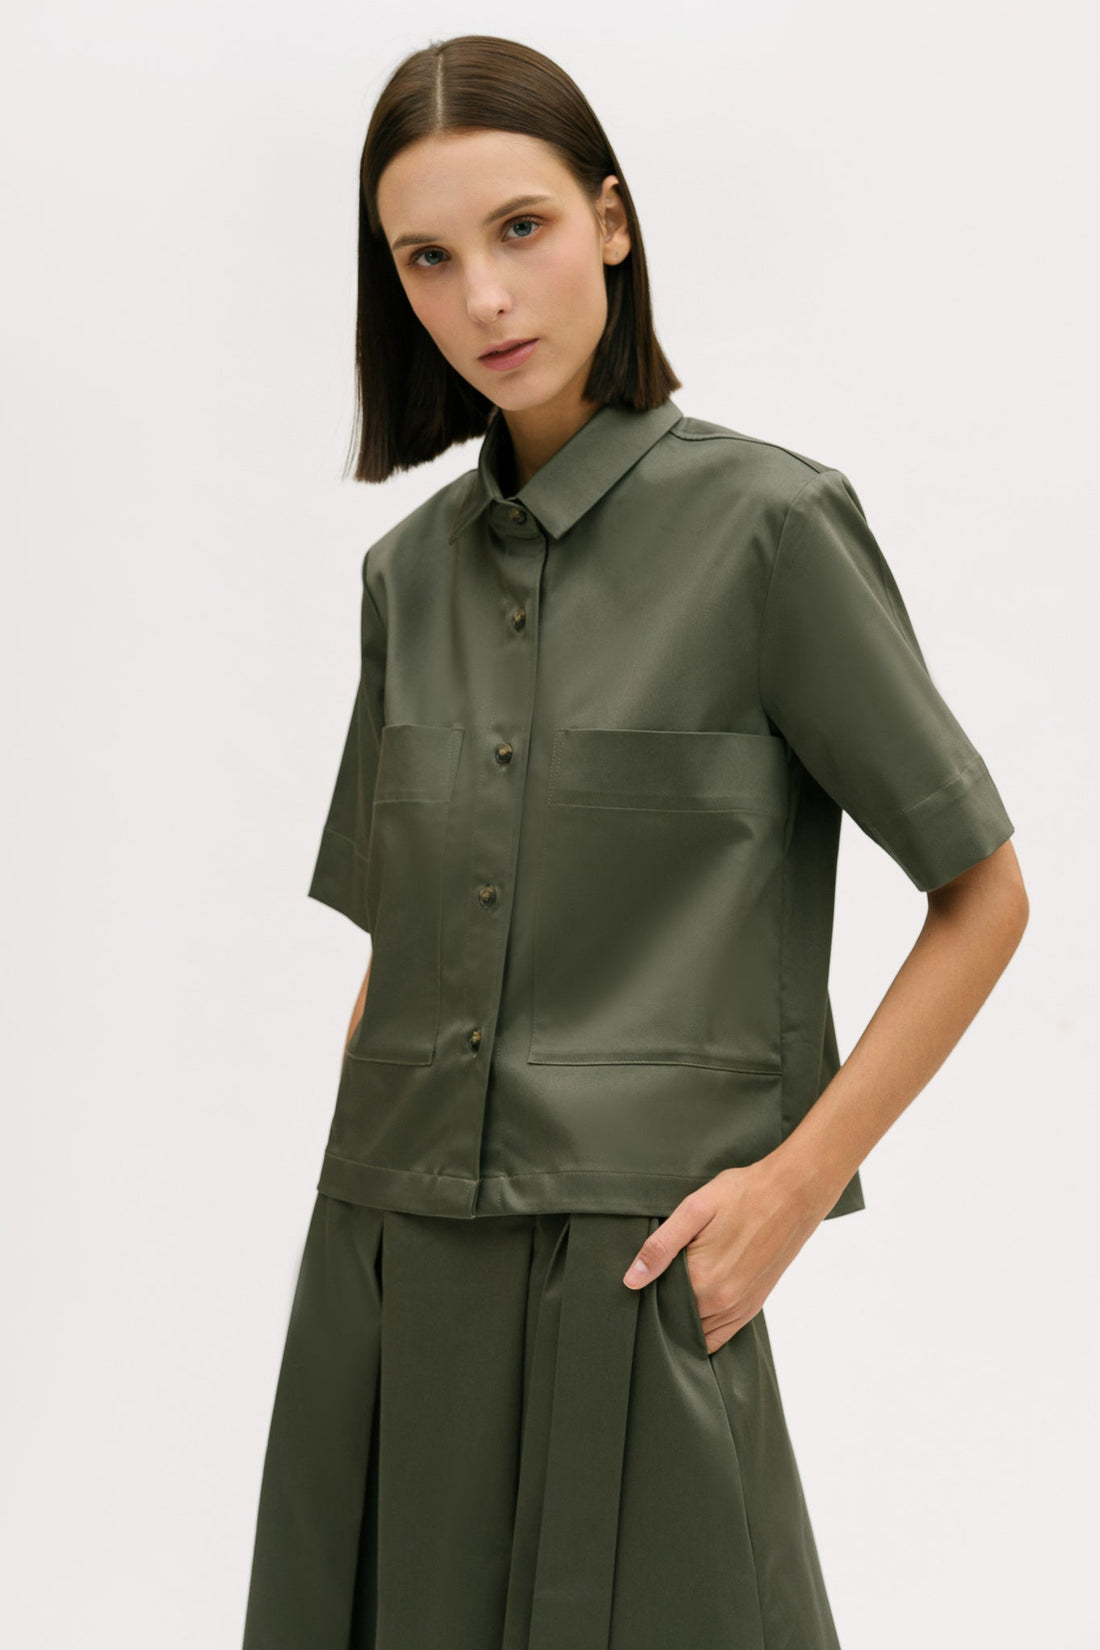 A woman with shoulder length brown hair is wearing a green utility shirt